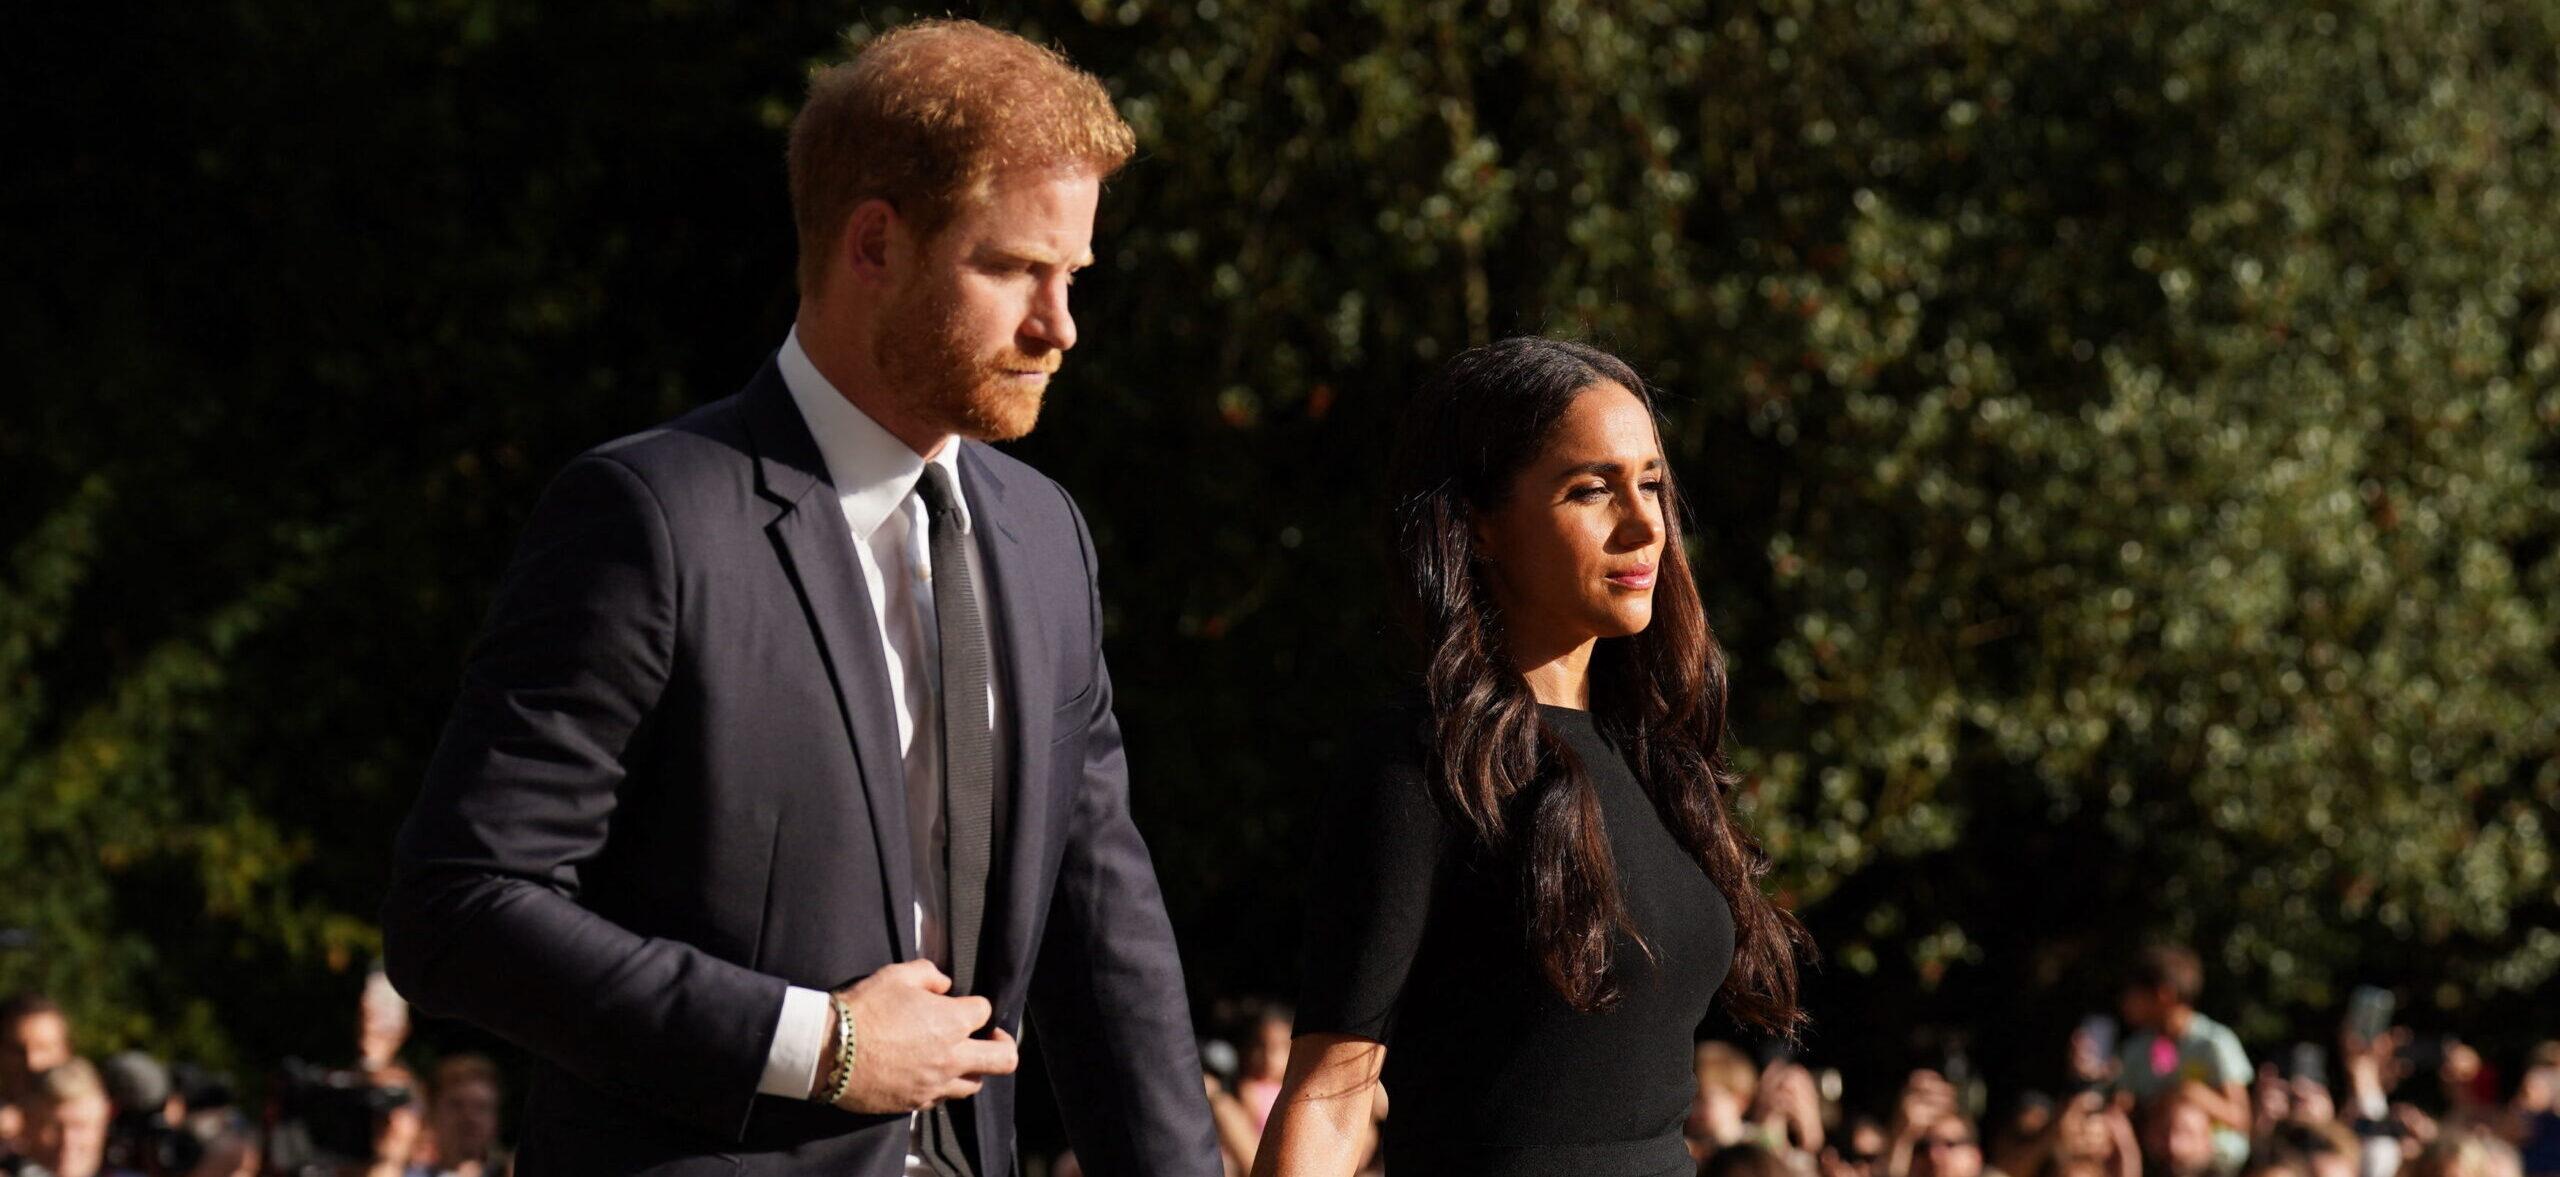 Prince Harry & Meghan Markle Were Allegedly DENIED A Ride Home On Air Force One After The Queen’s Funeral